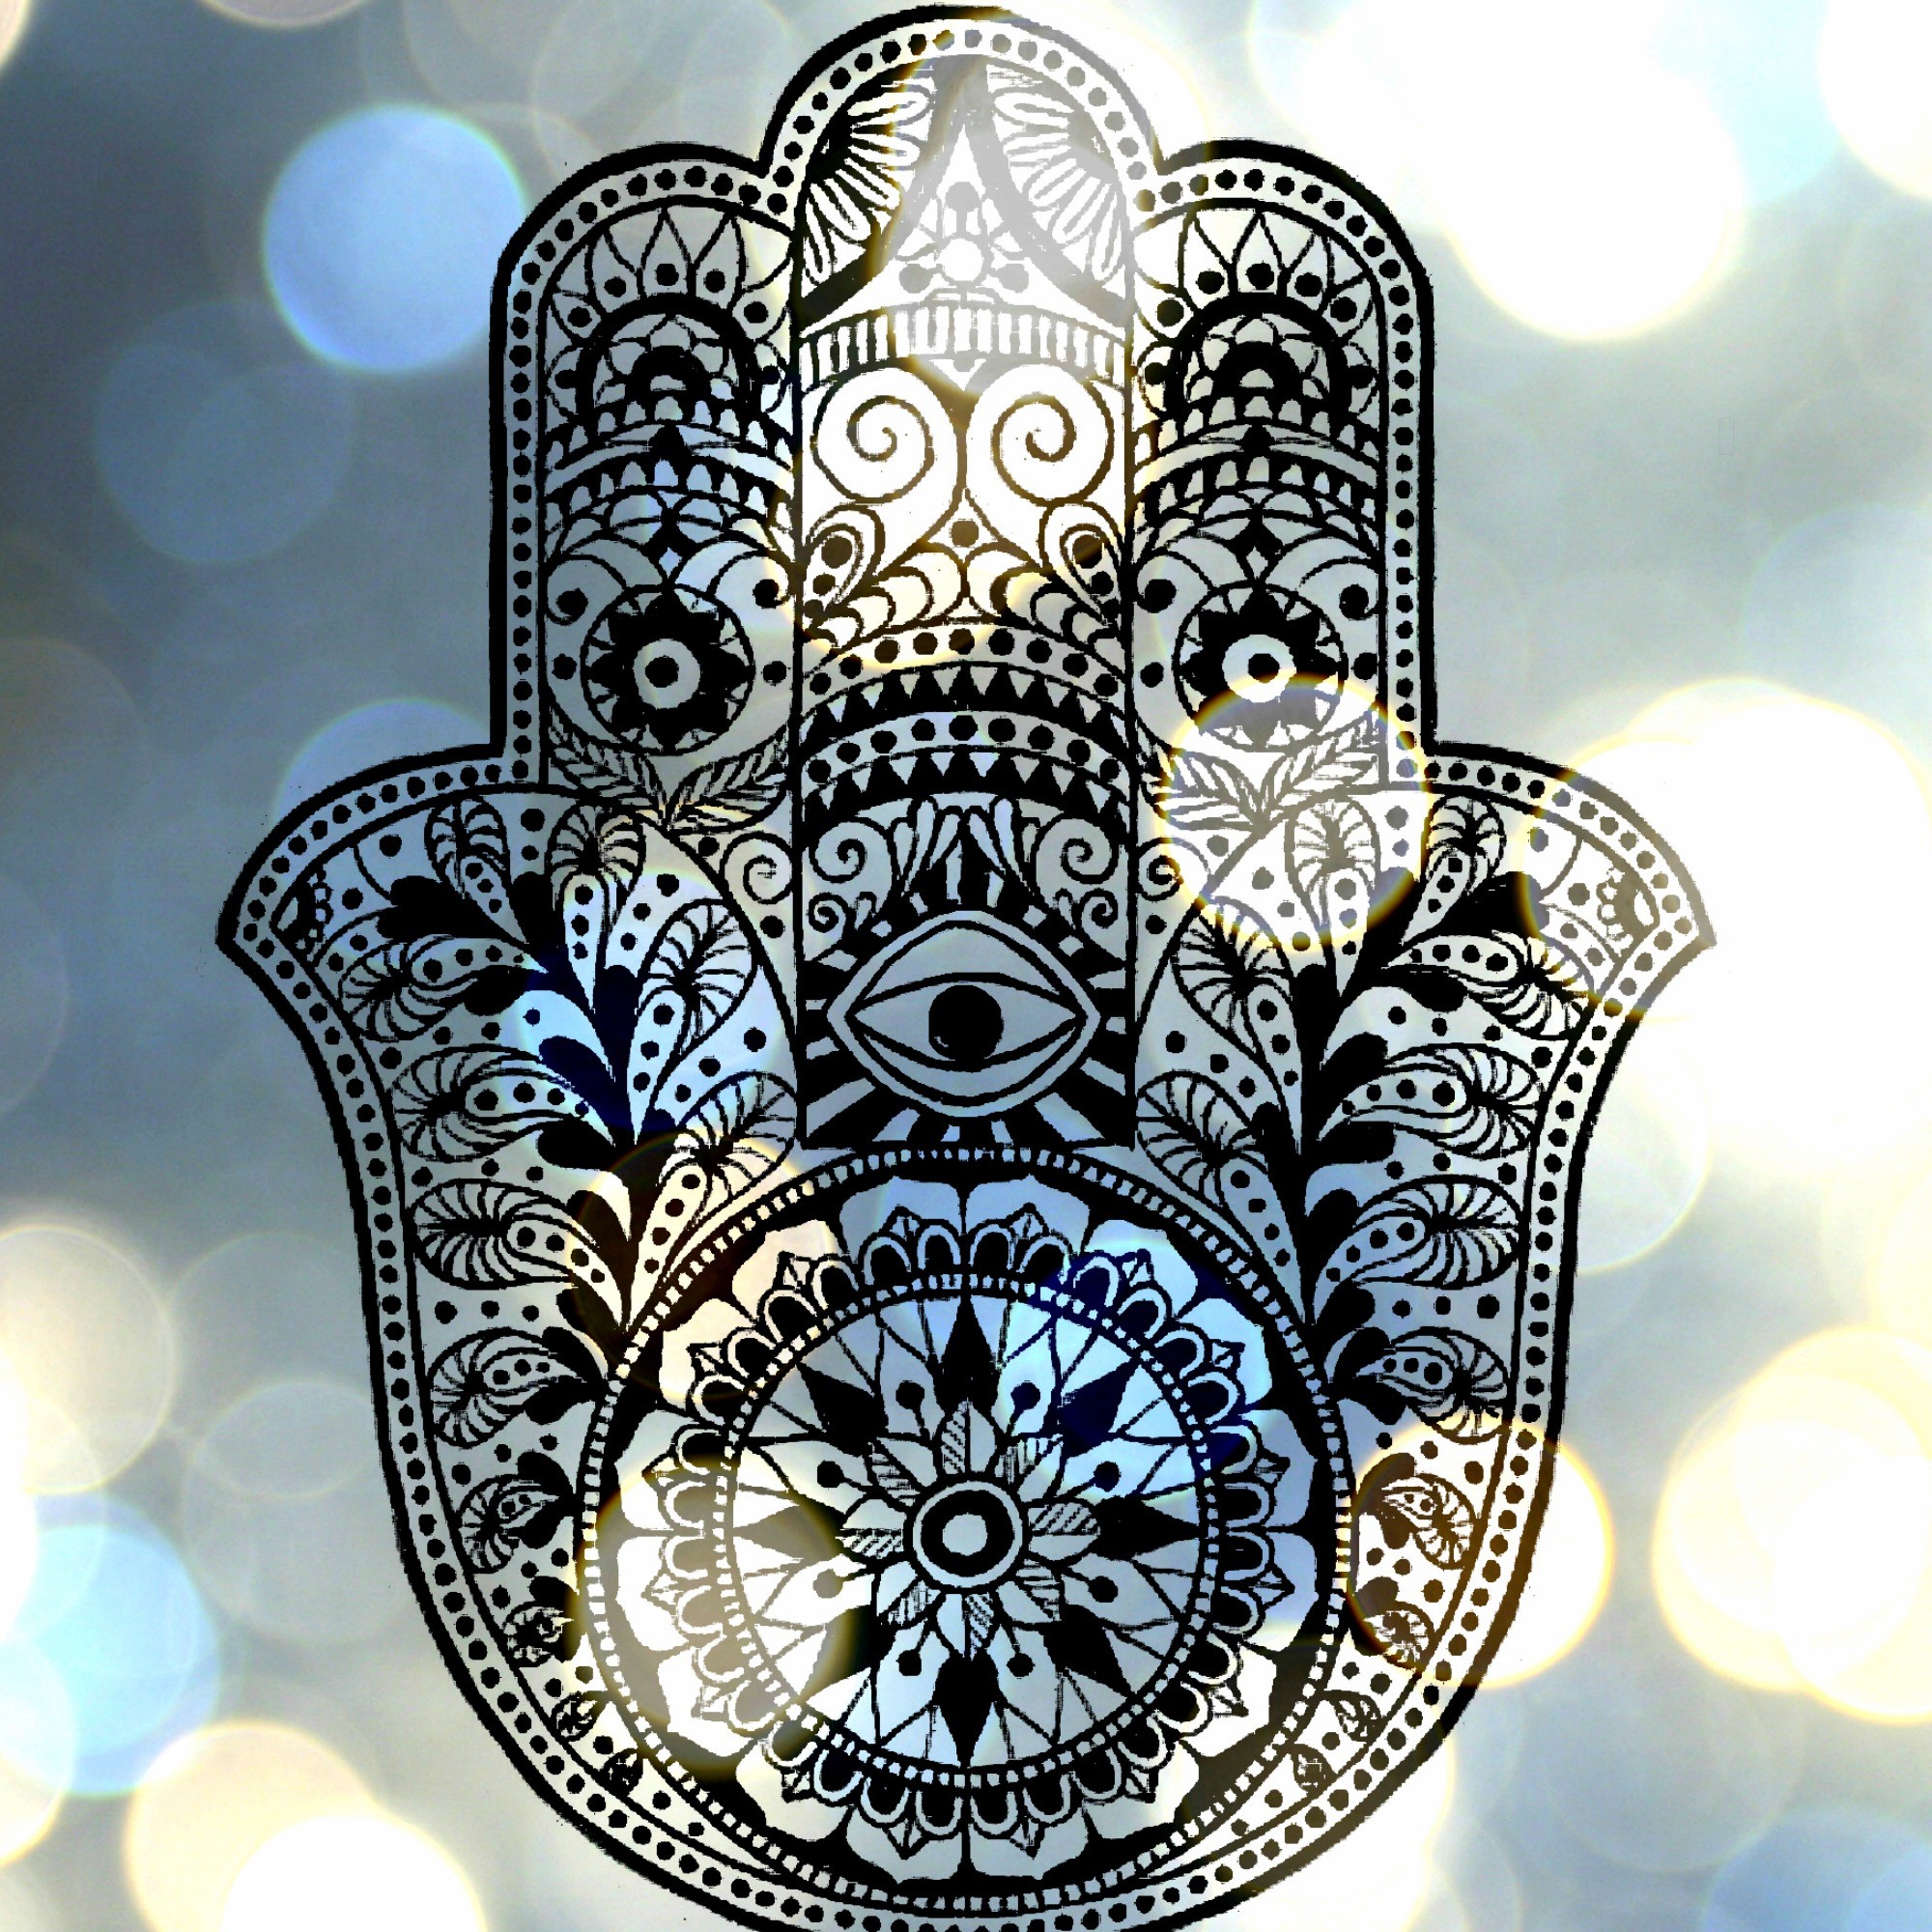 Search Results For “hamsa Iphone 5 Wallpaper” Adorable - HD Wallpaper 